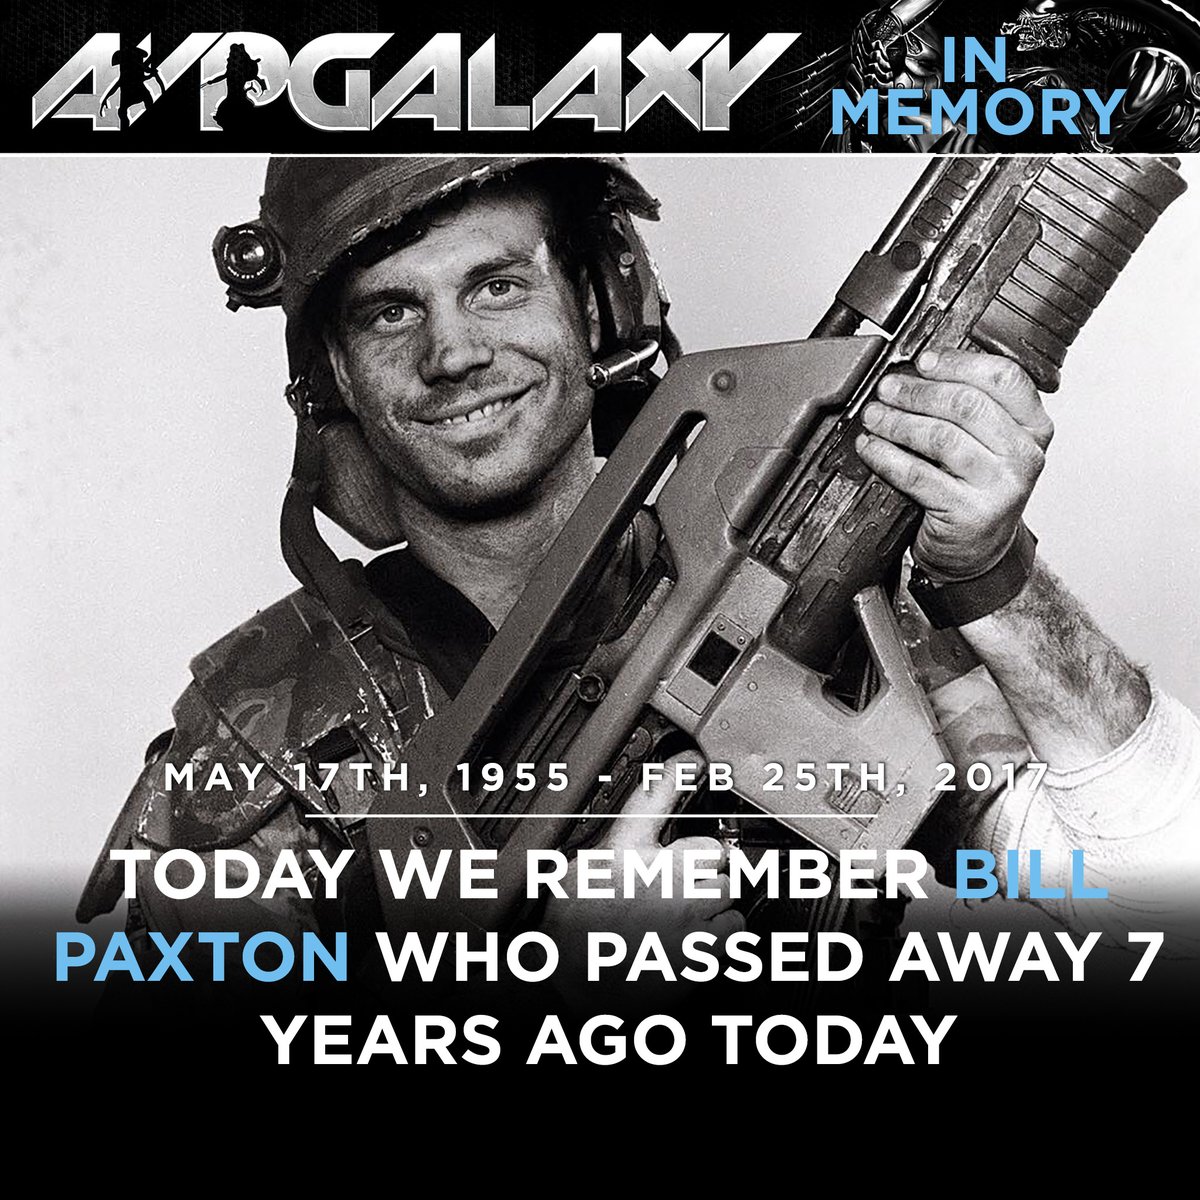 The staff and community of Alien vs. Predator Galaxy remember Aliens and Predator 2's iconic Bill Paxton who passed away 7 years ago today. These franchises wouldn't be the same without him. #BillPaxton #InMemory #RIP #Aliens #Predator2